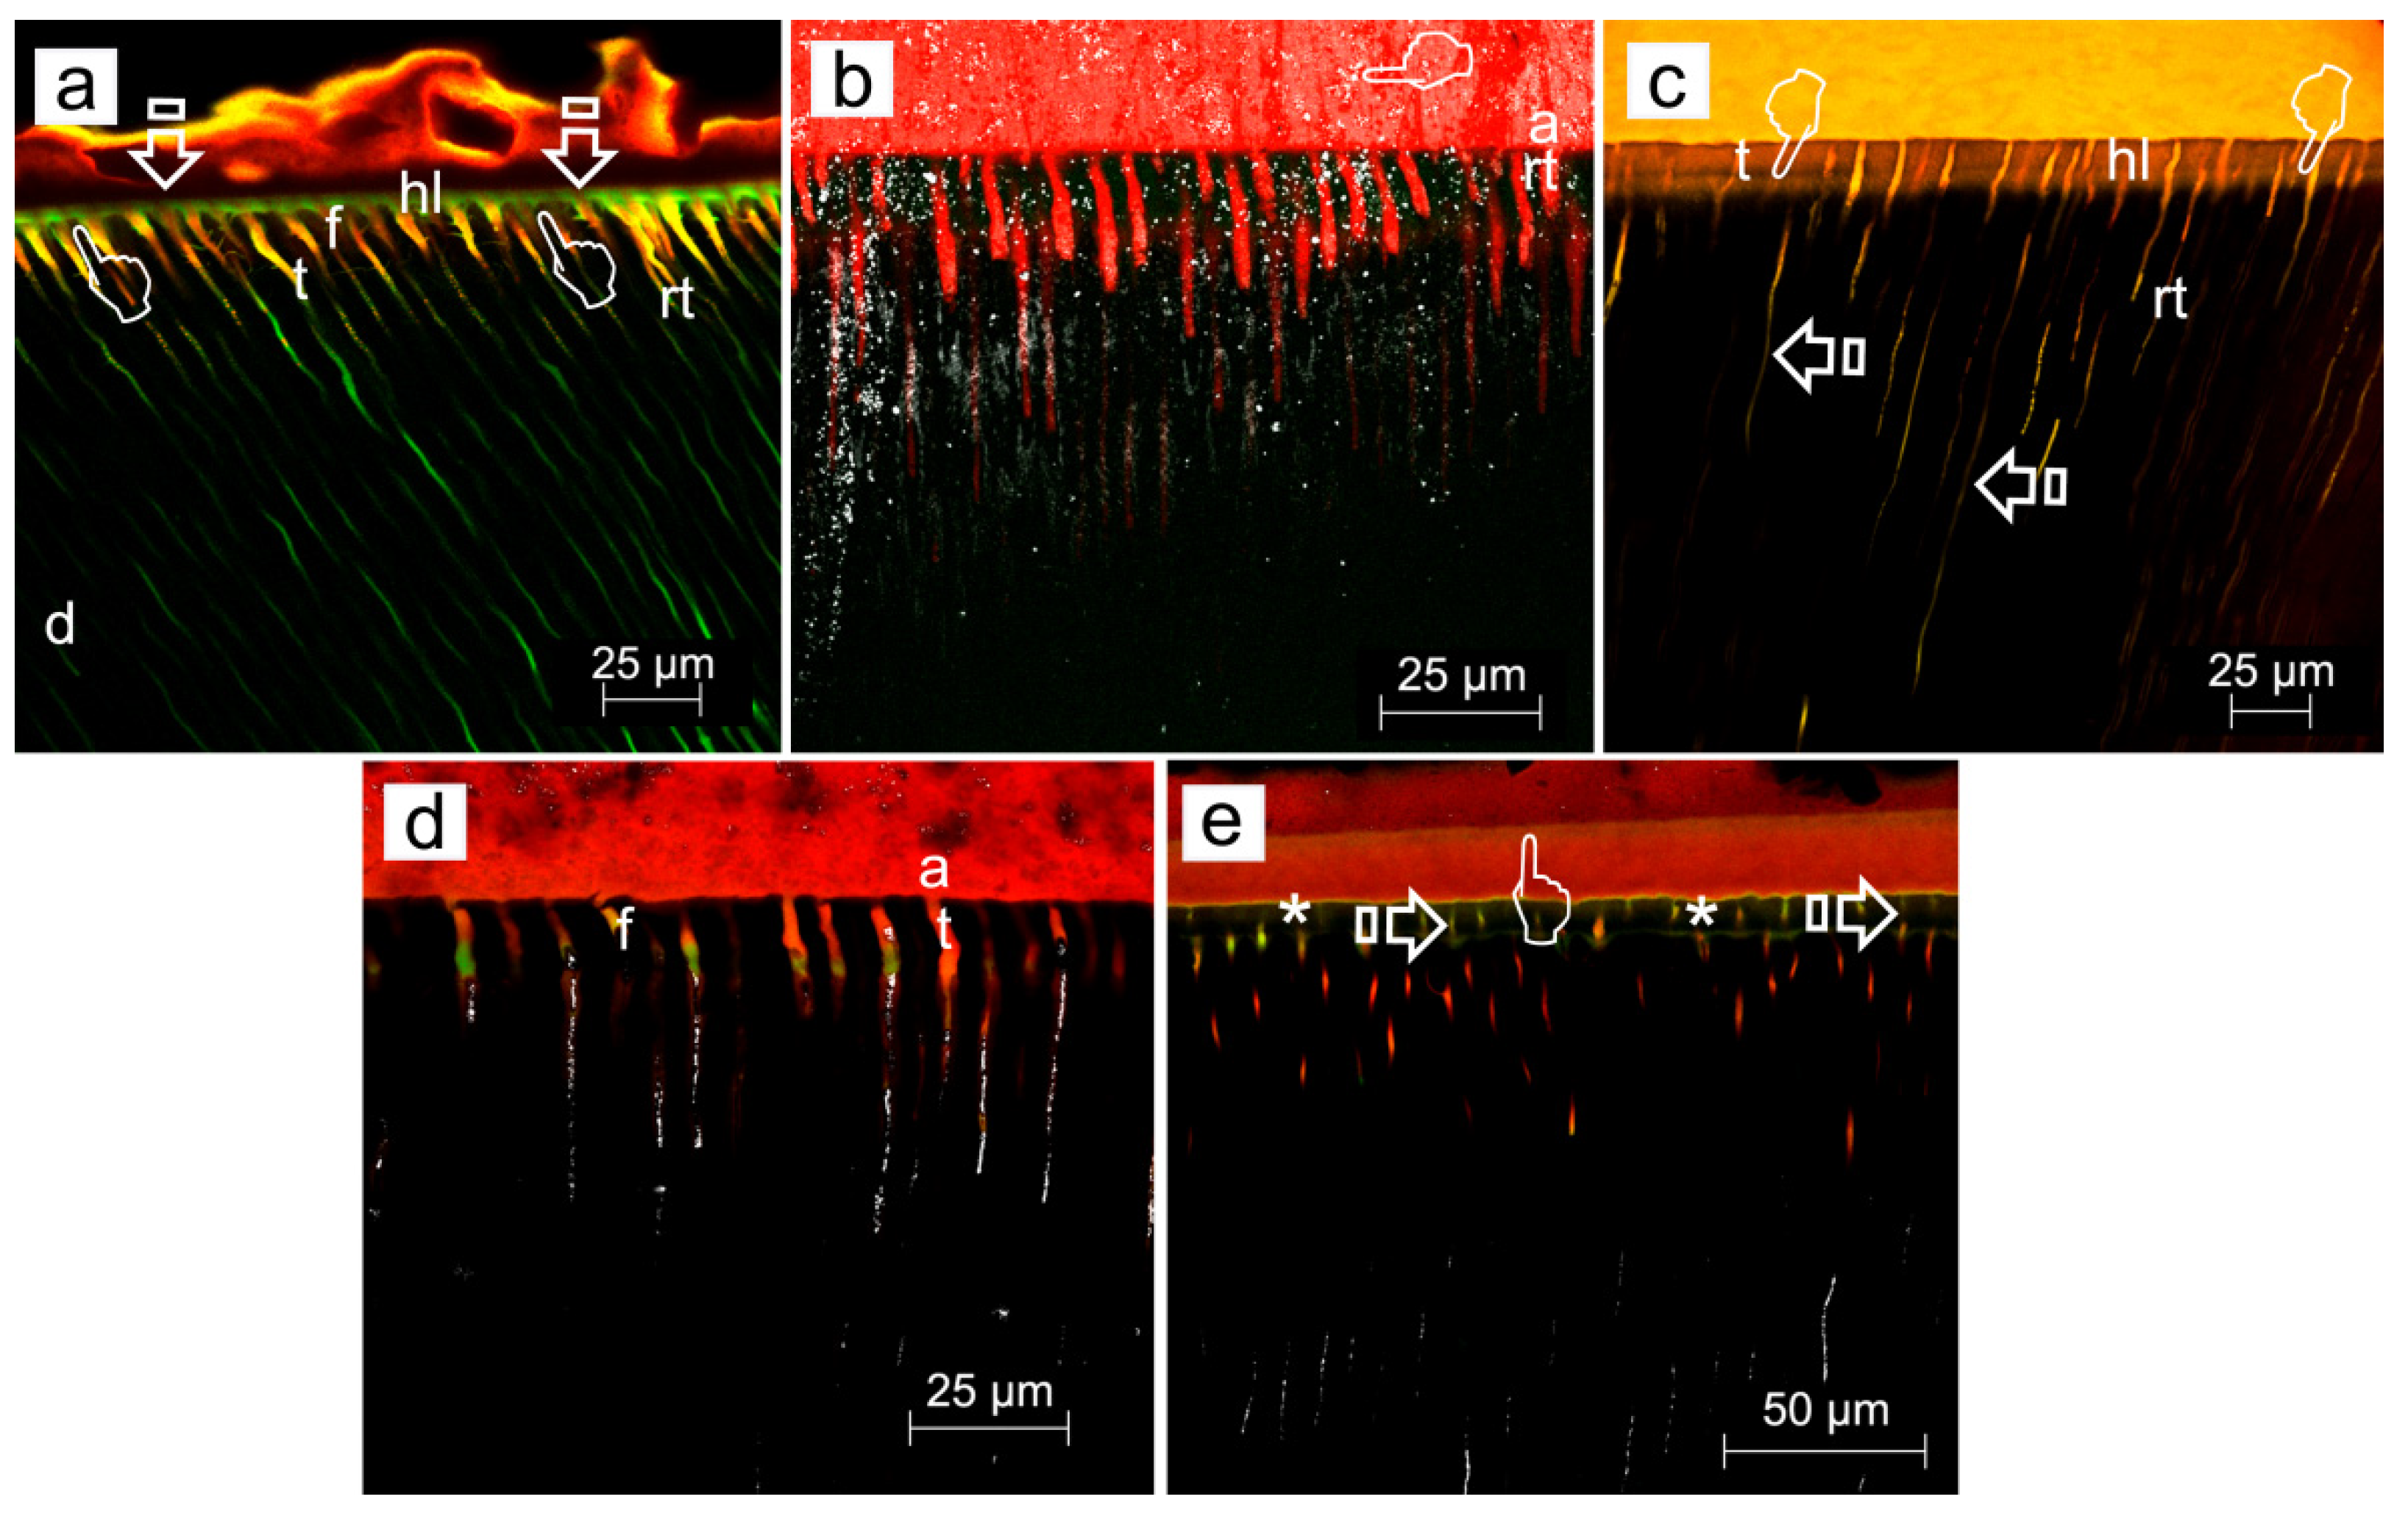 Light micrographs showing several regions of the dentin-pulp interface